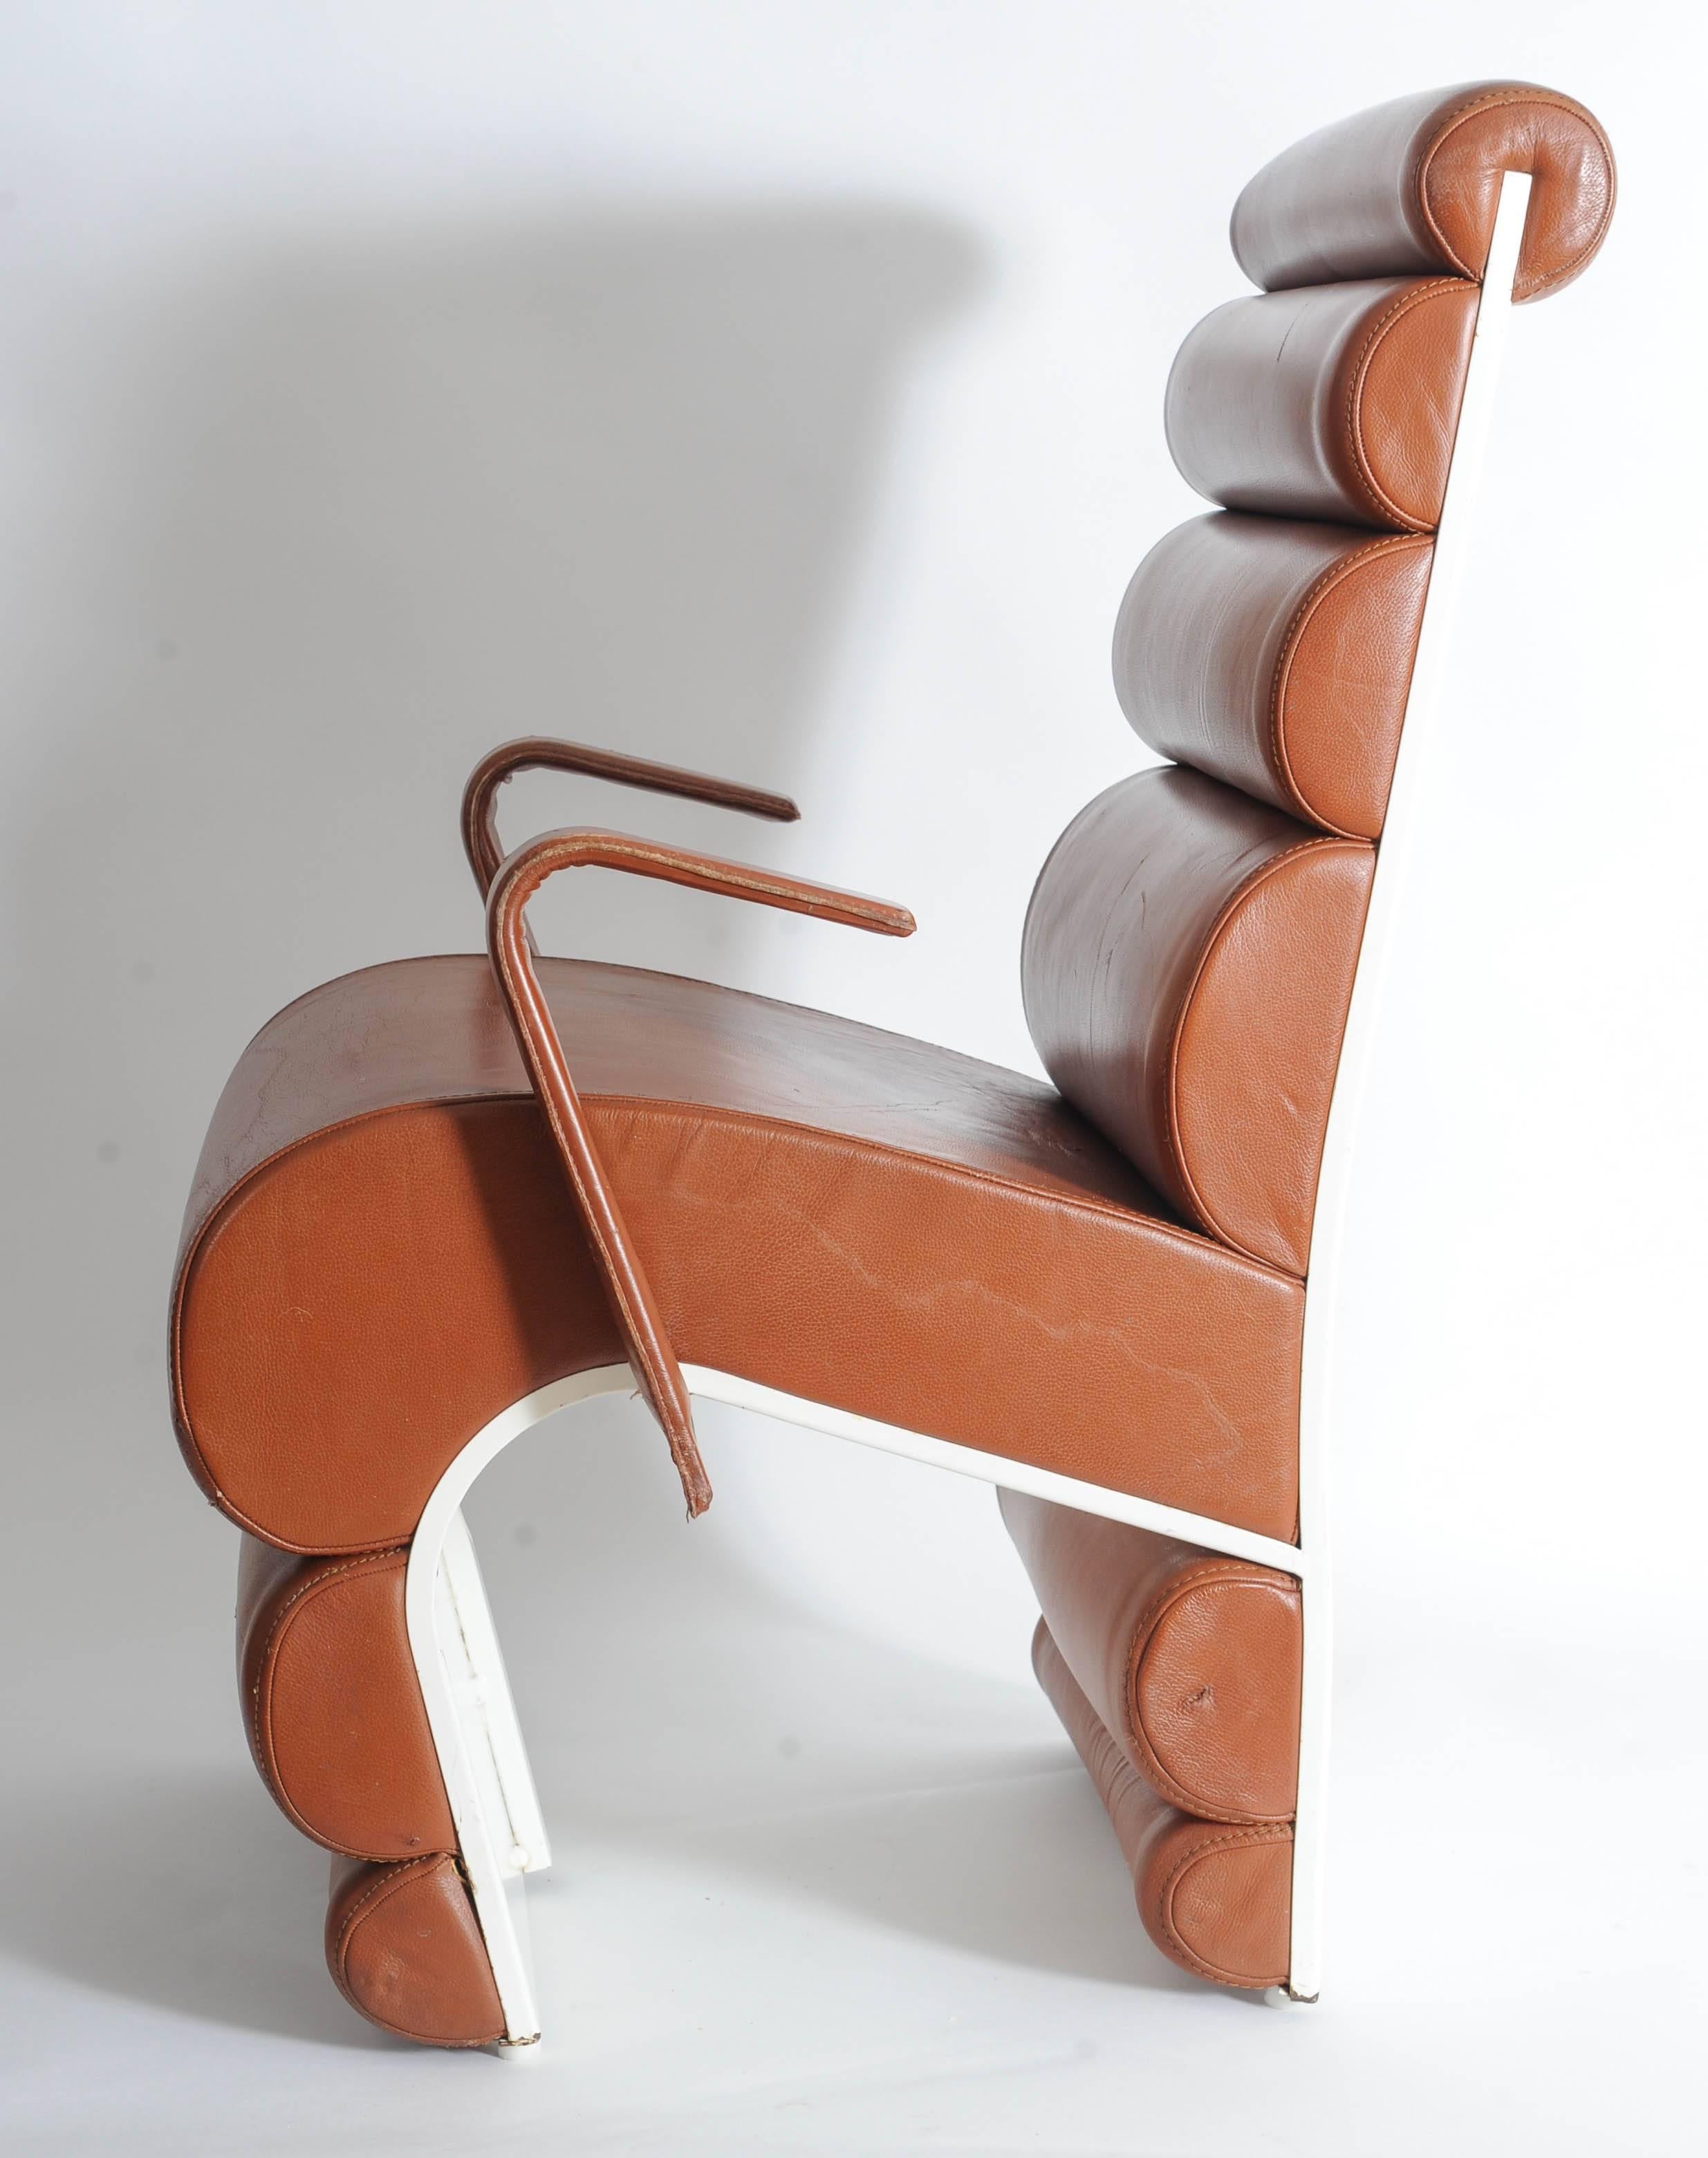 Mid-Century Modern Steel and leather chairs designed for Parisian nightclub Le Queen